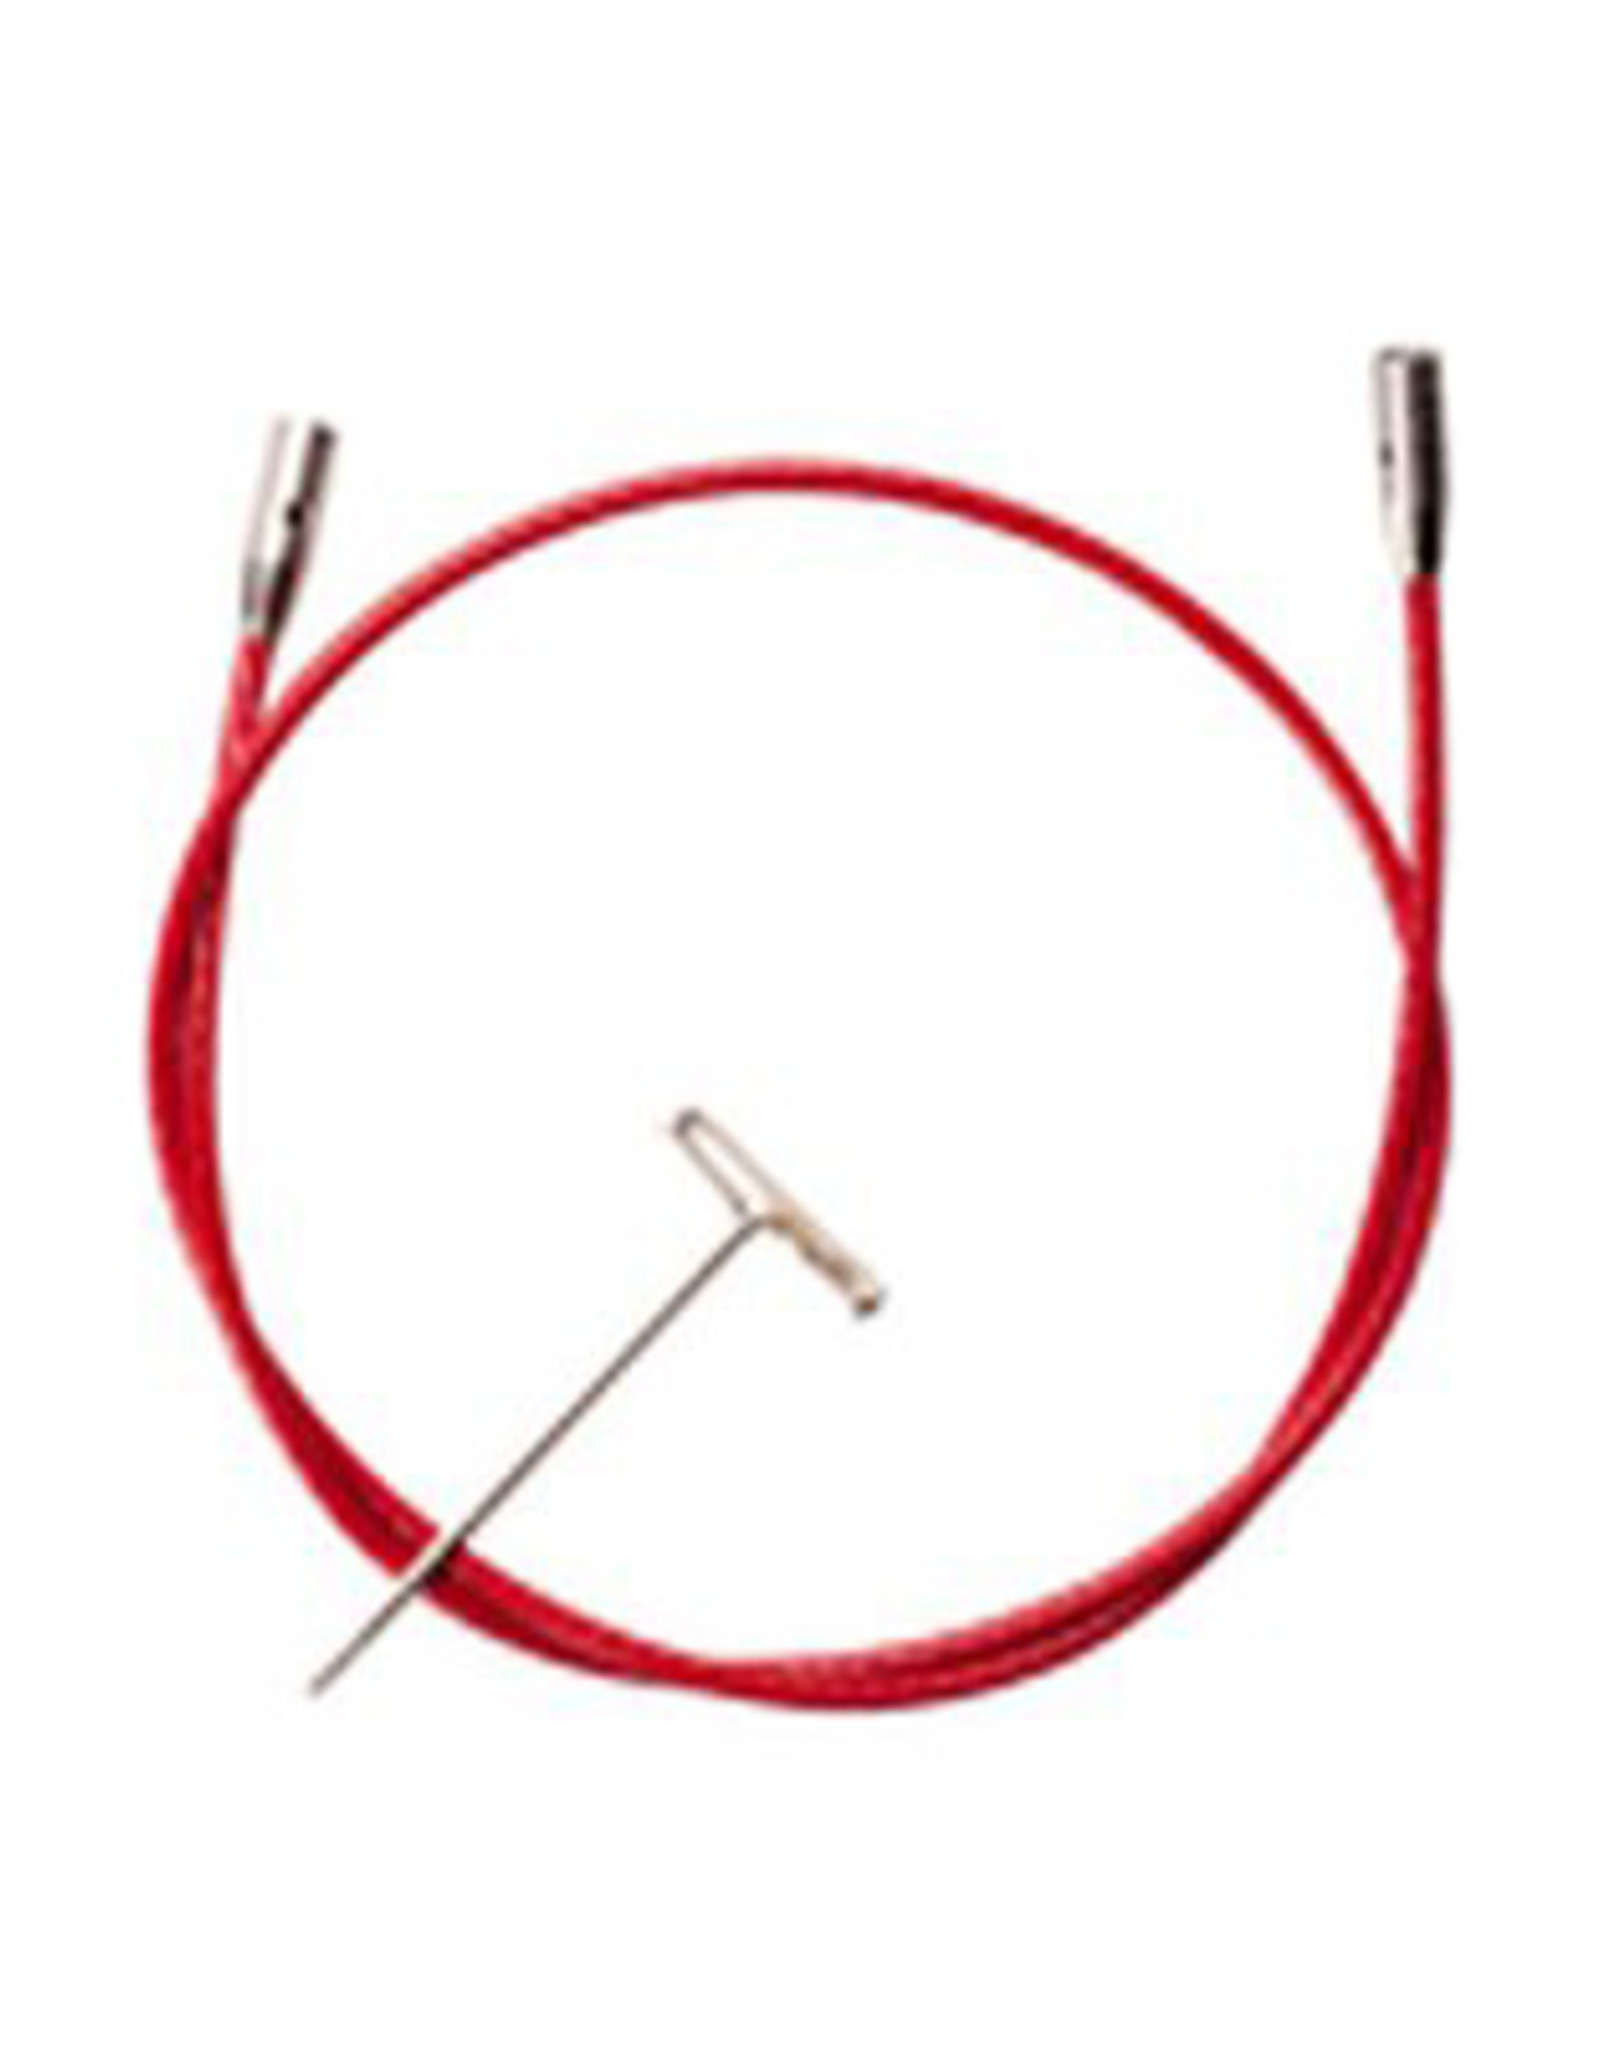 ChiaoGoo Twist Red Cable